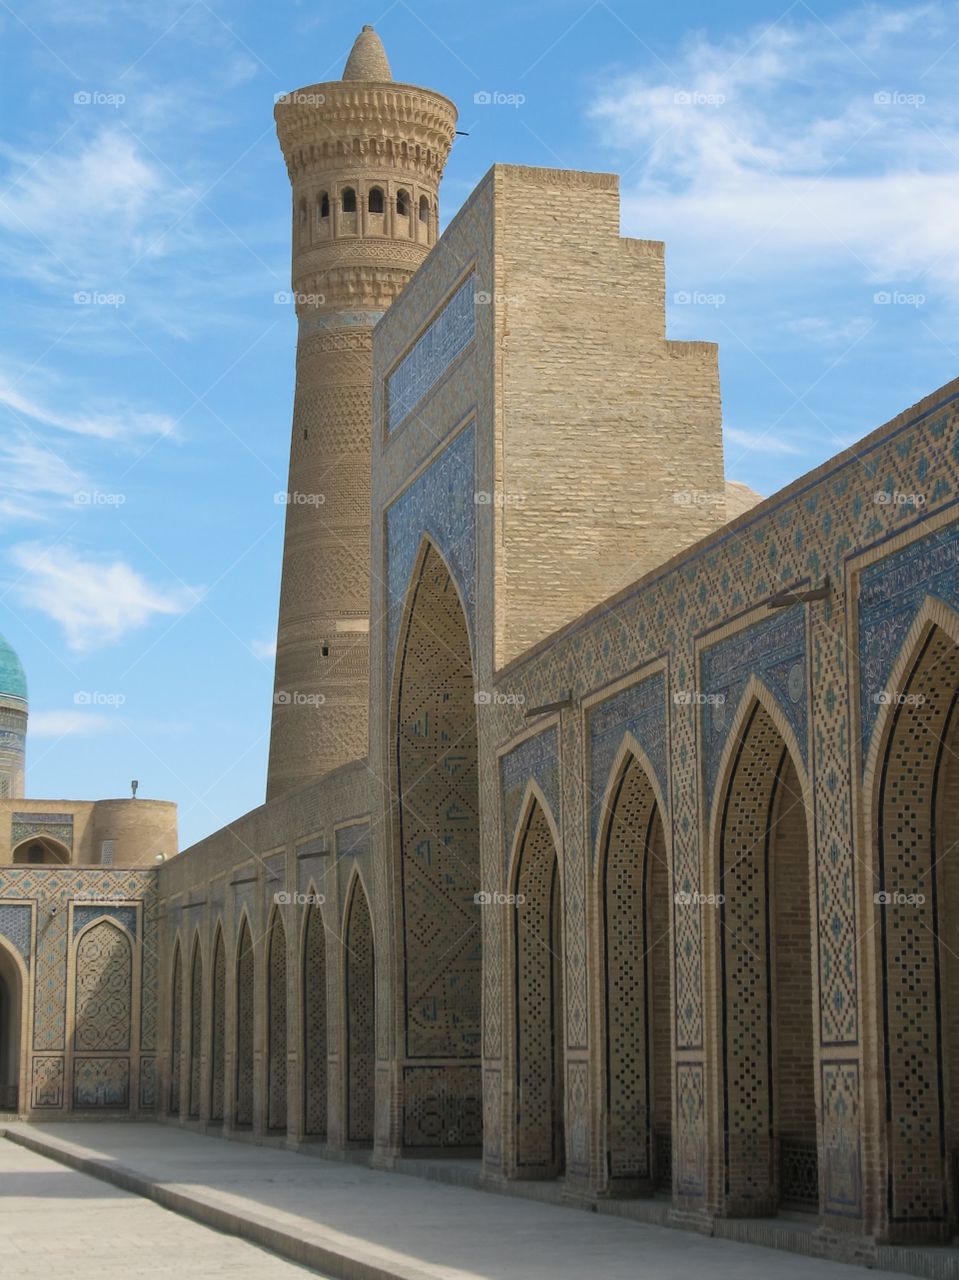 A number of arches and a minaret in Samarkand